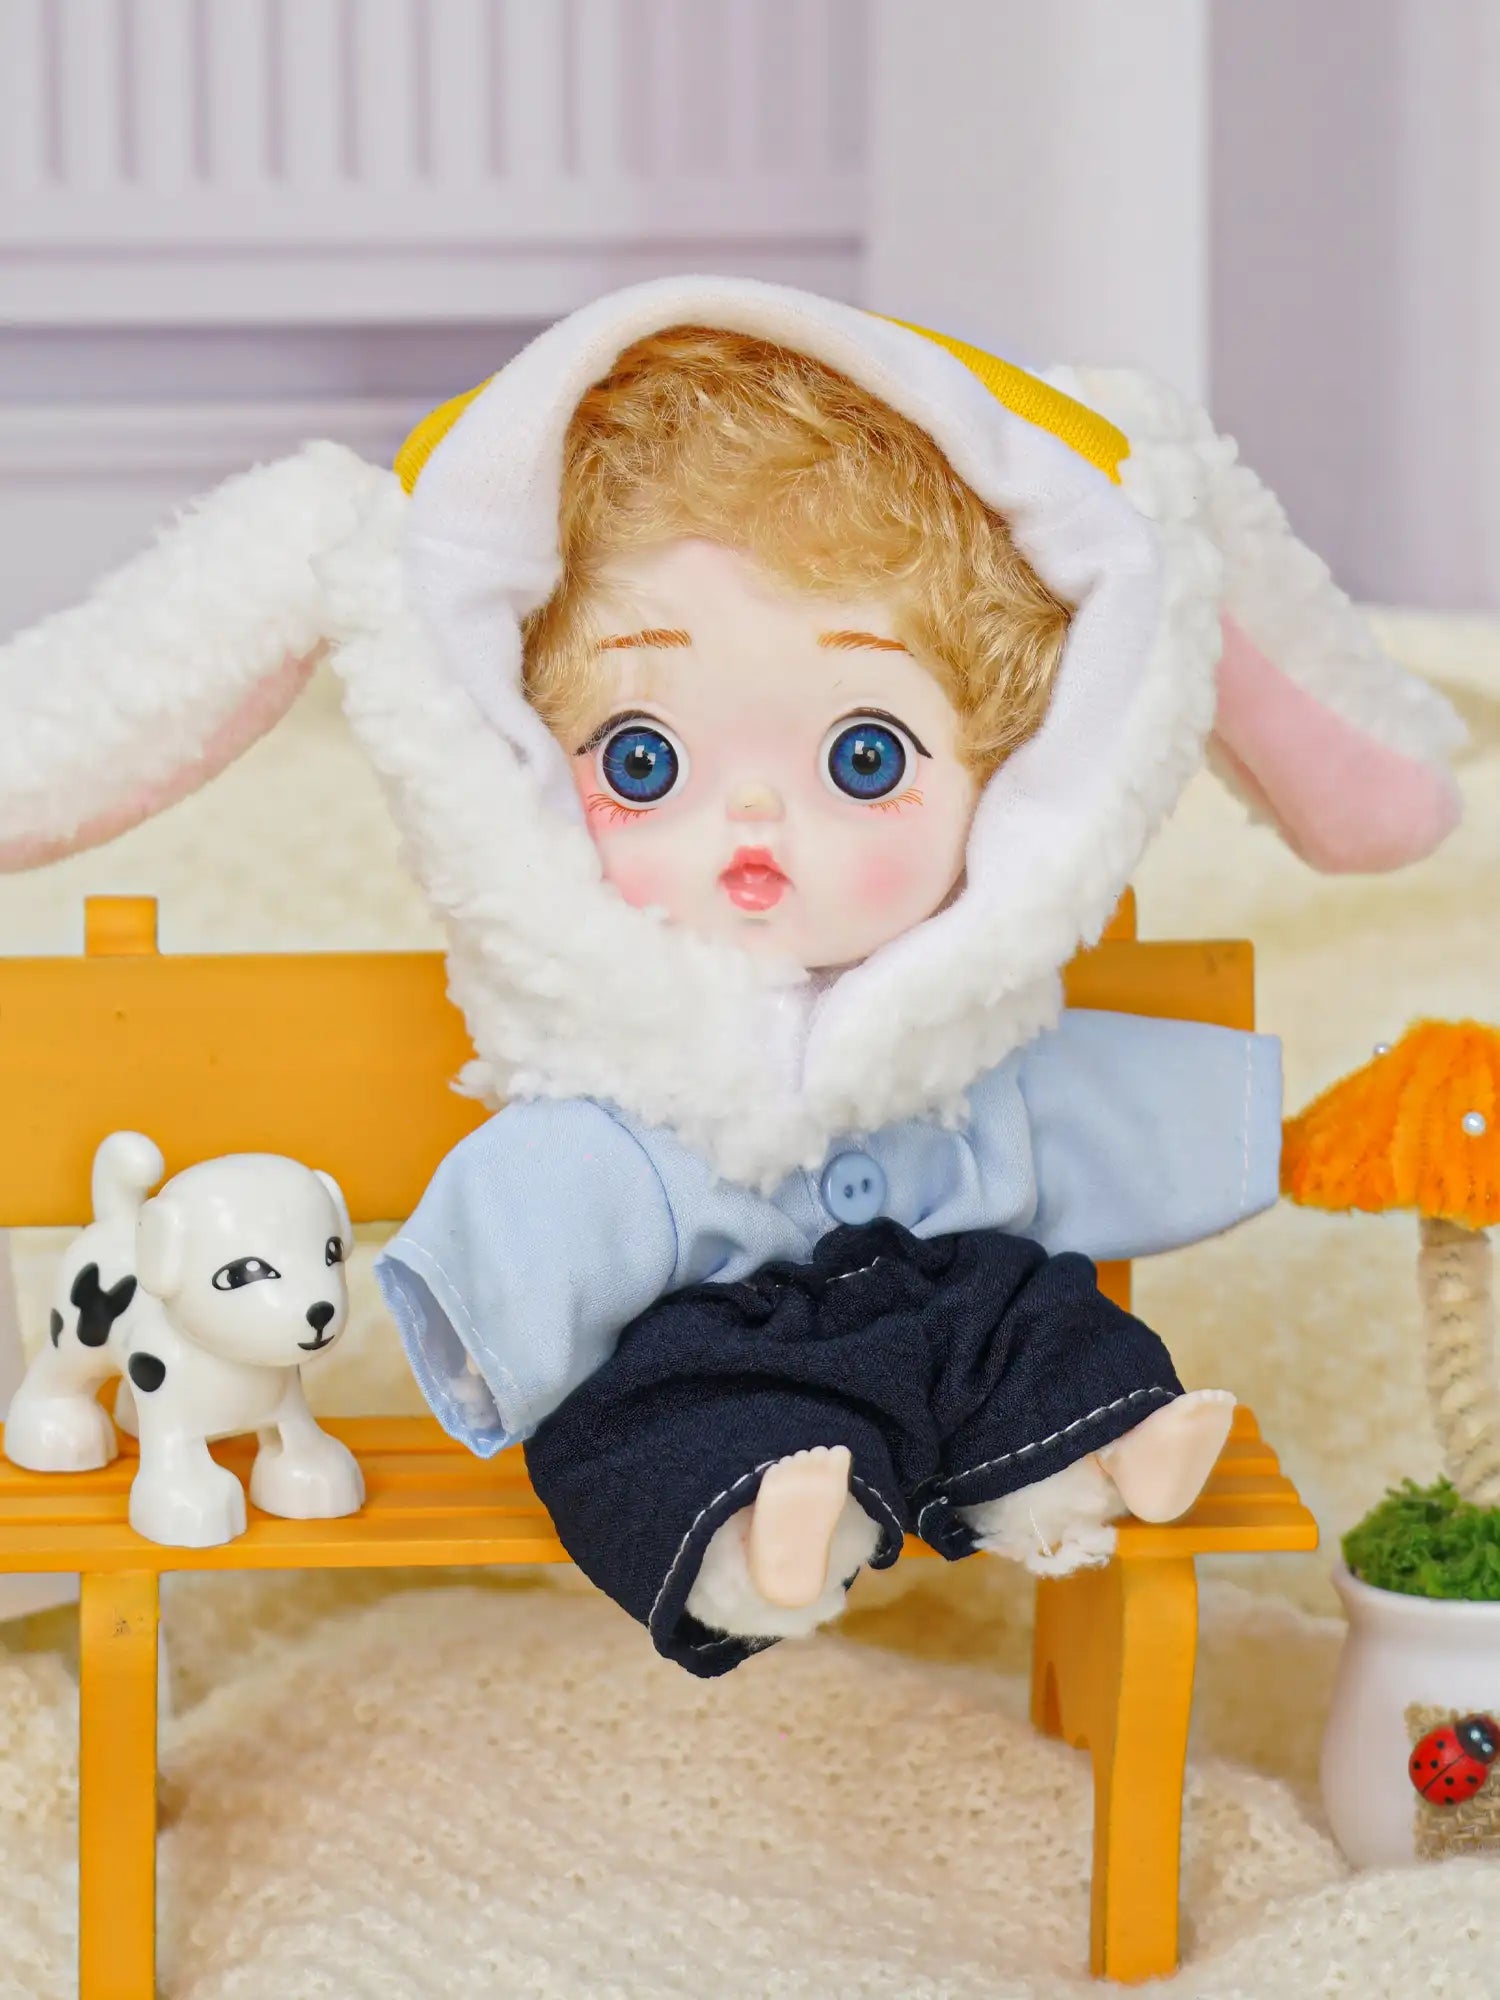 An endearing doll with a sheep-themed hat and a curious gaze, alongside a playful puppy toy and small decorations.